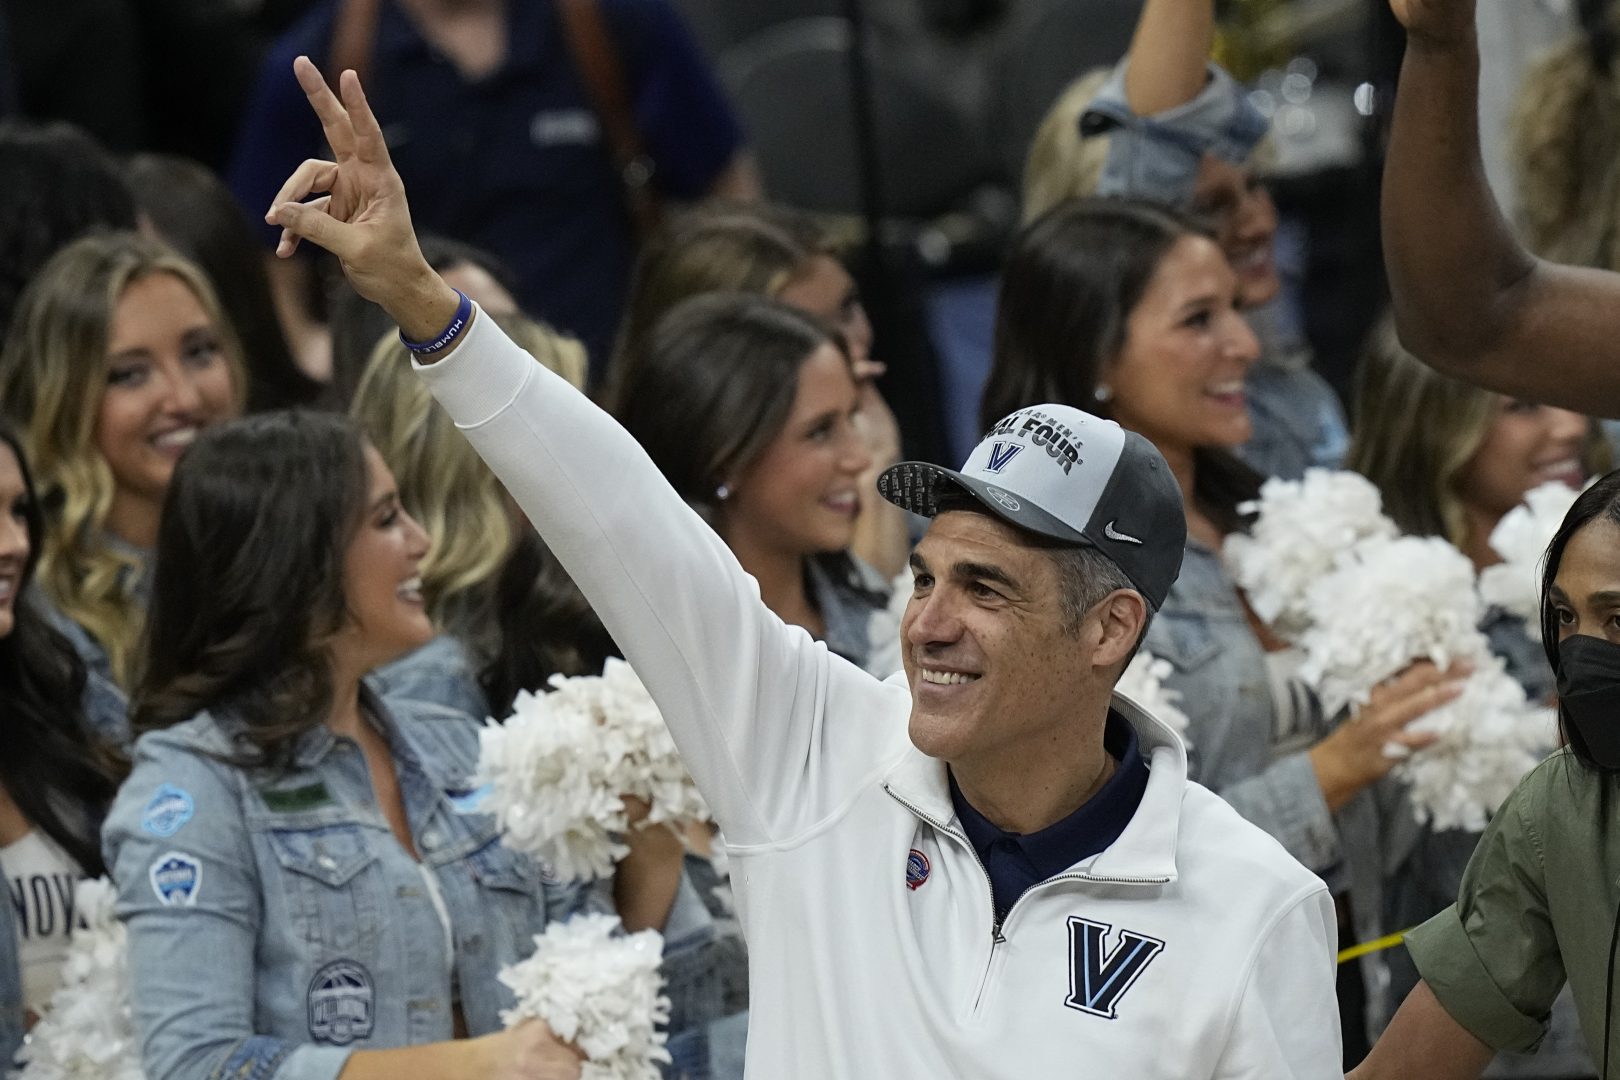 Villanova head coach Jay Wright leaves the court after their win against Houston during a college basketball game in the Elite Eight round of the NCAA tournament on Saturday, March 26, 2022, in San Antonio. (AP Photo/Eric Gay)